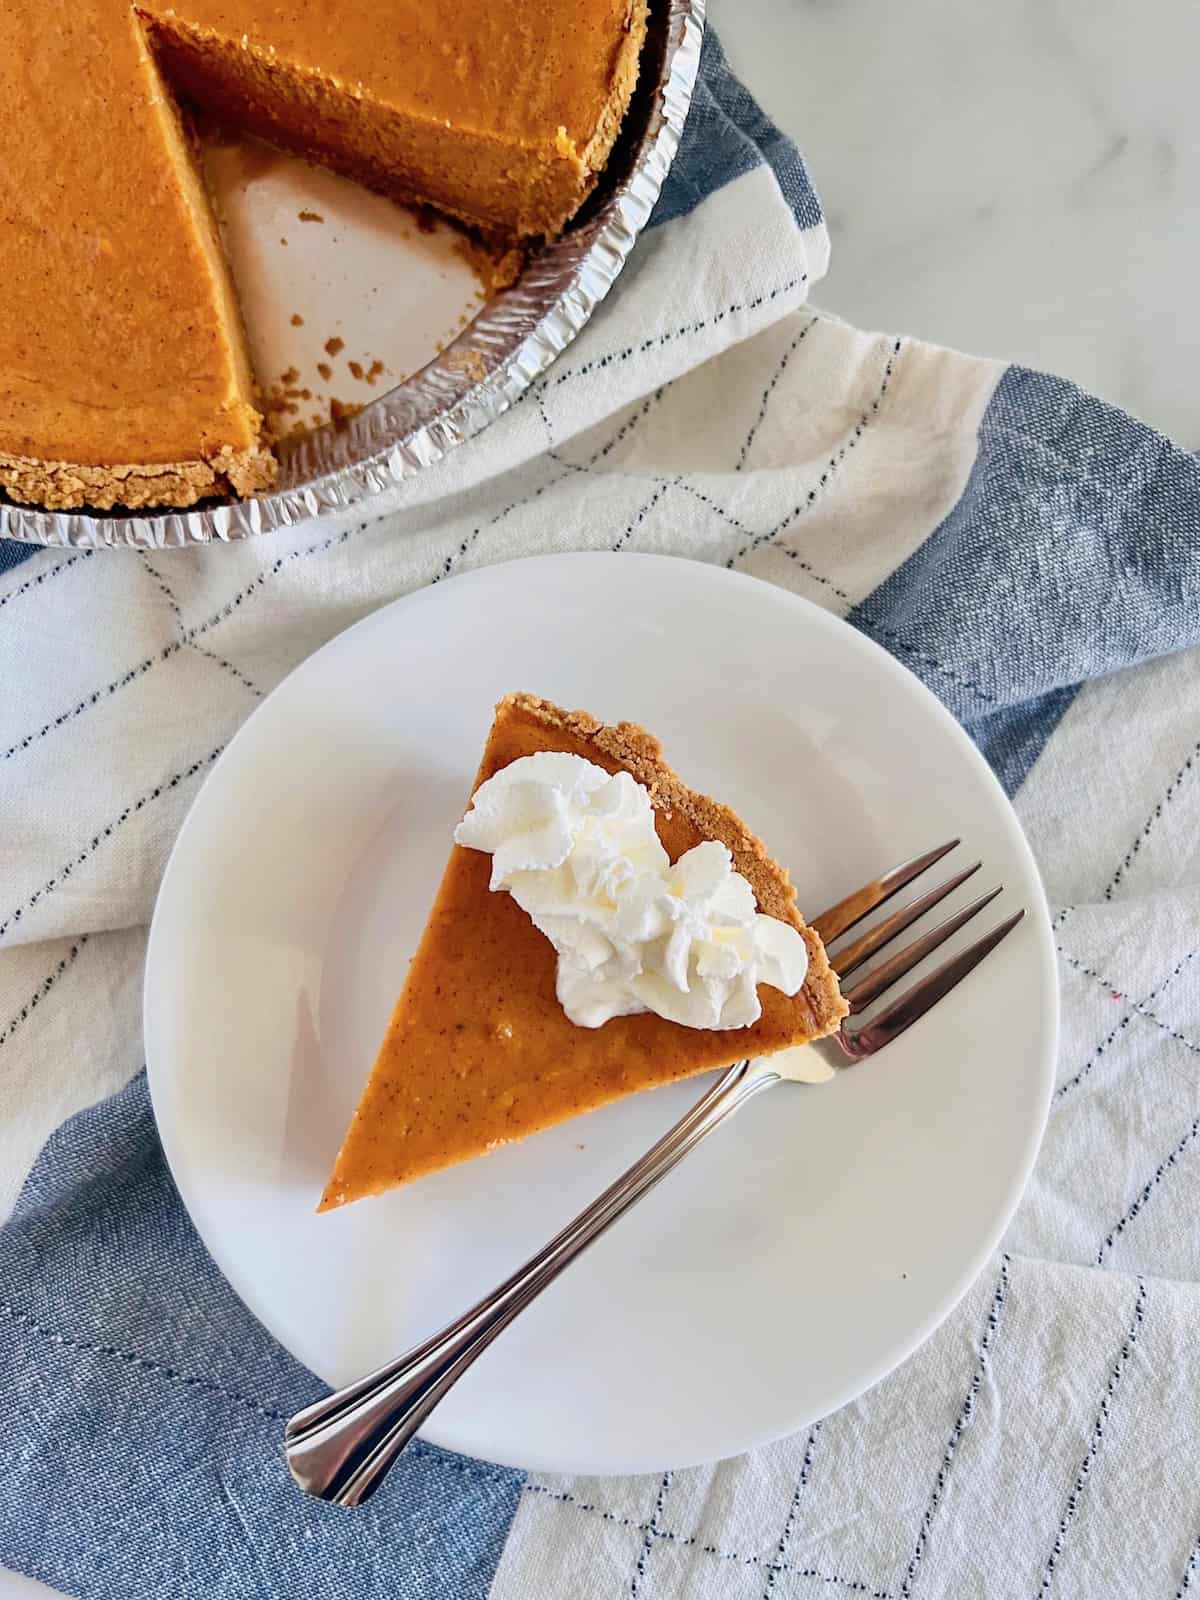 Graham Cracker Crust Sweet Potato Pie Plated slice with a dollop of whipped cream near whole pie on linen napkin